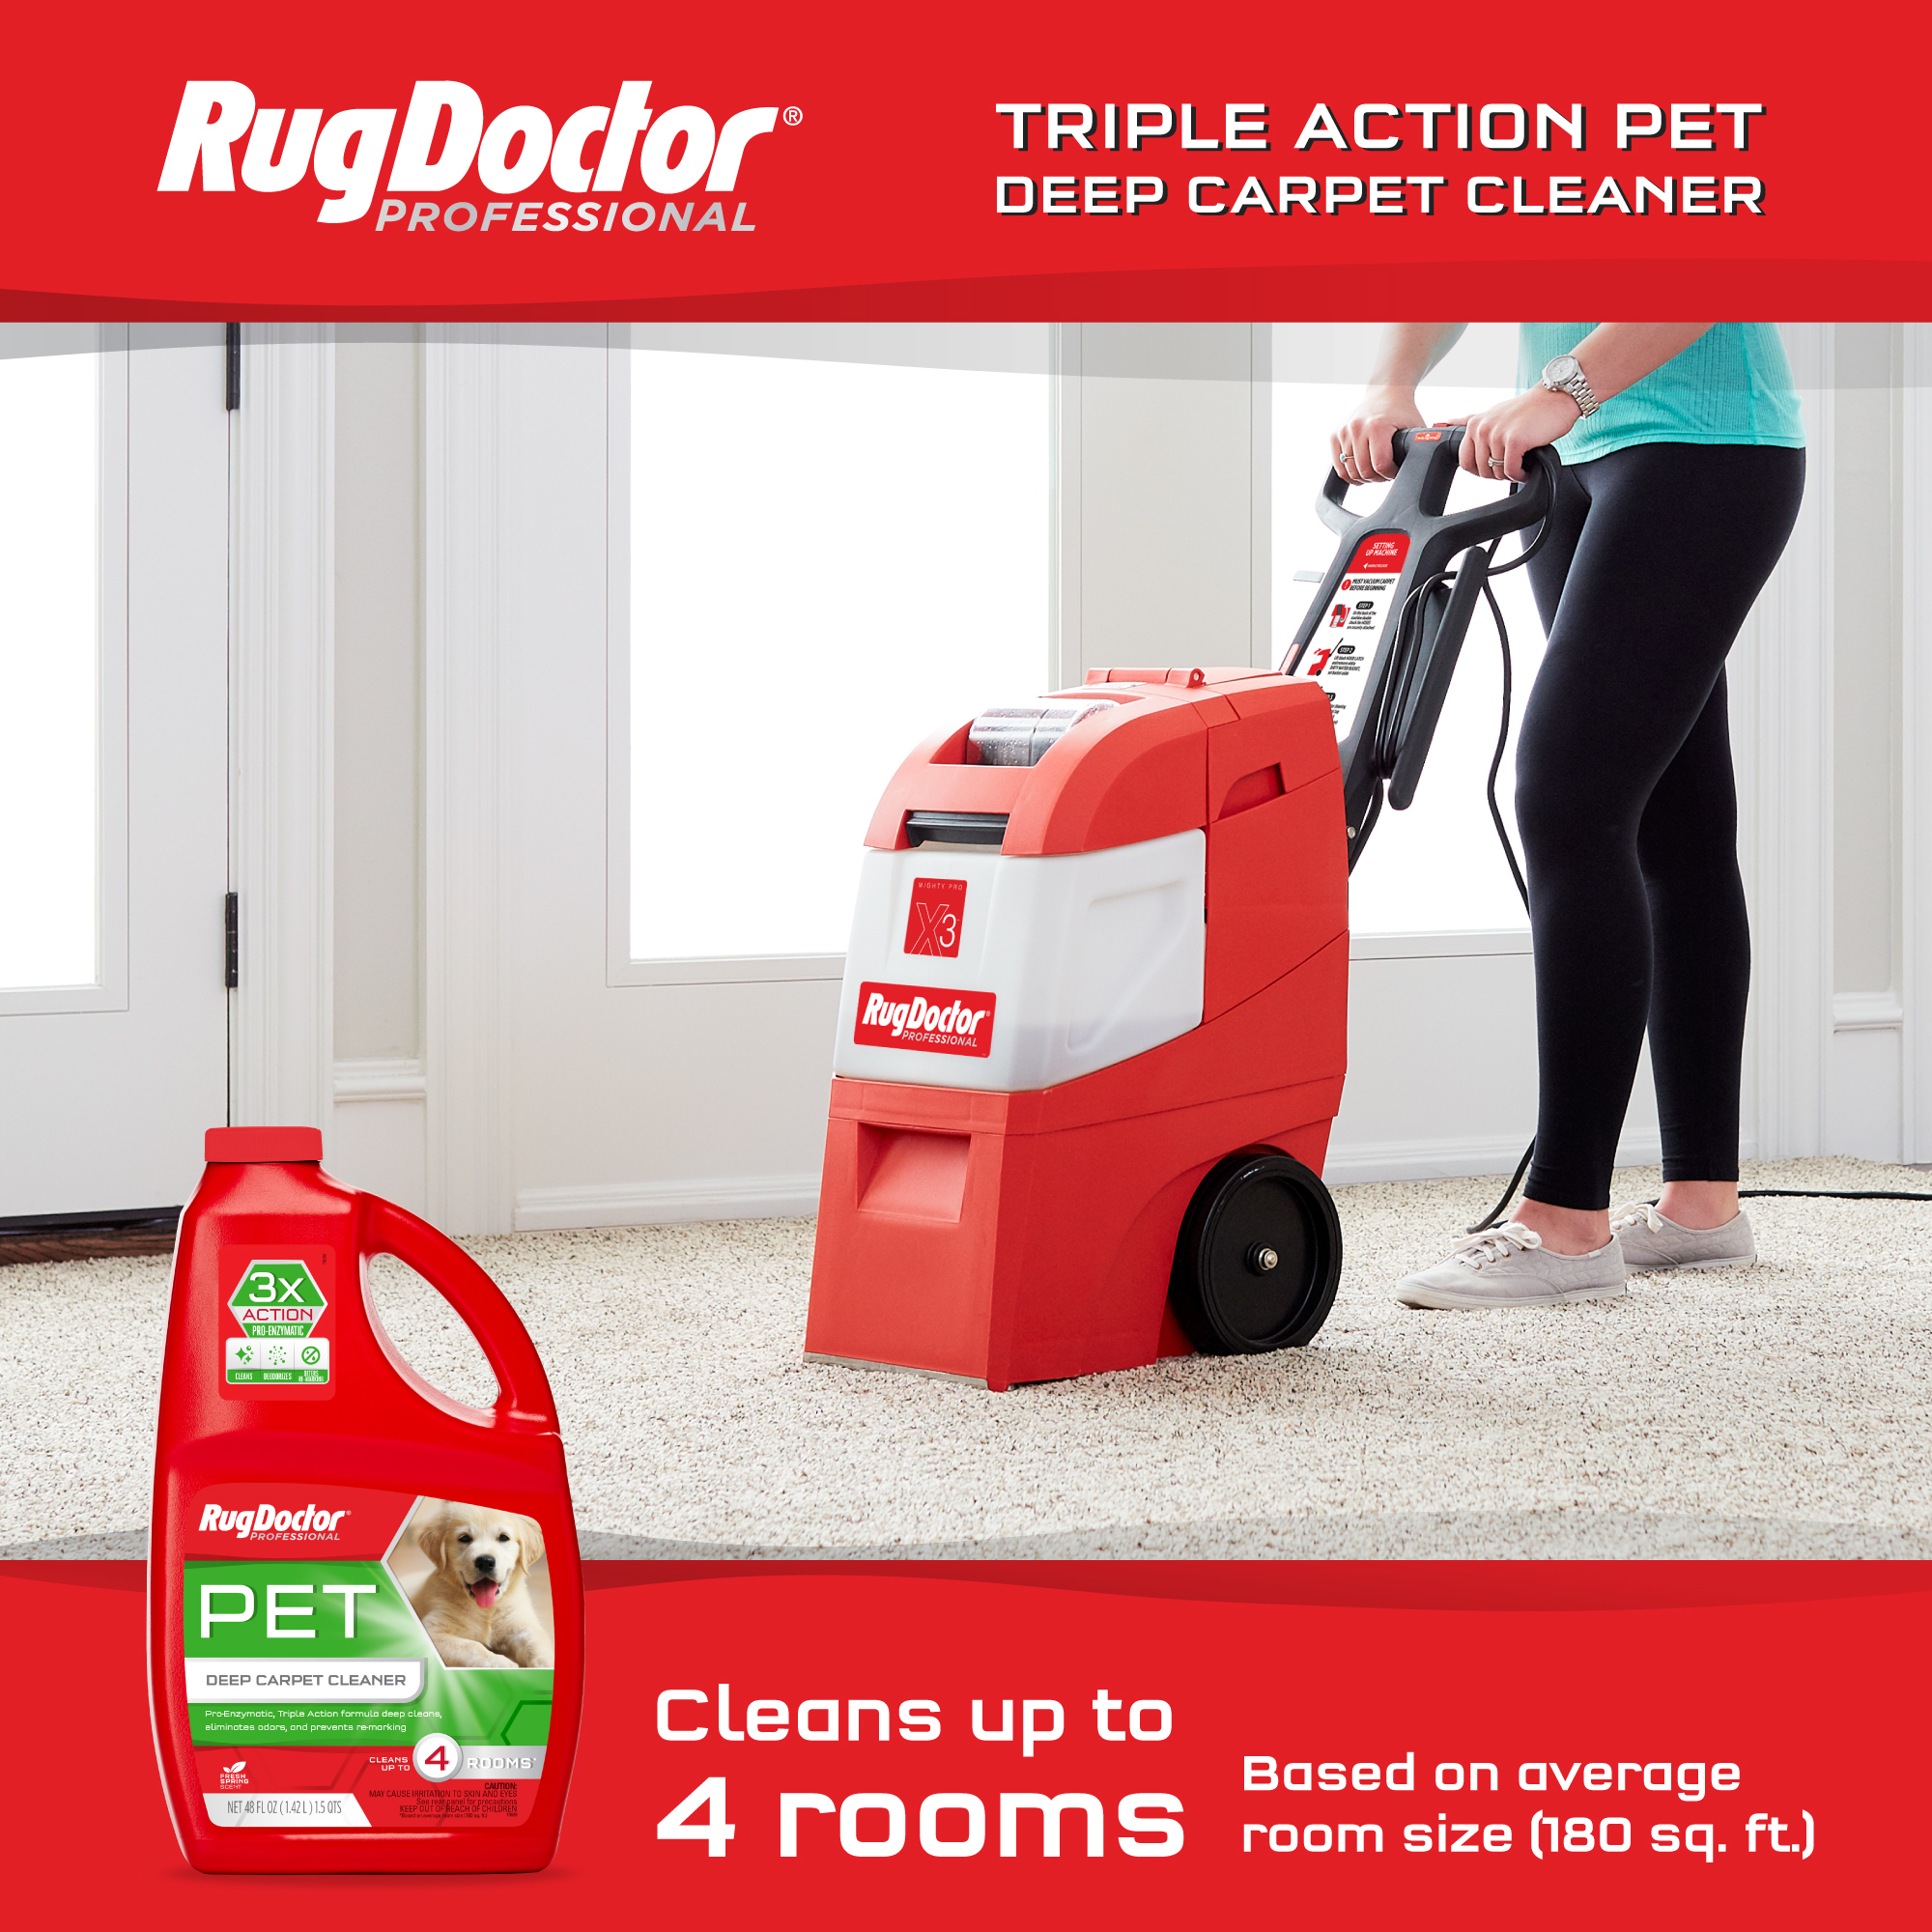 Rug Doctor Mighty Pro X3 Commercial Carpet Cleaner - Large Red Pet Pack - image 4 of 7